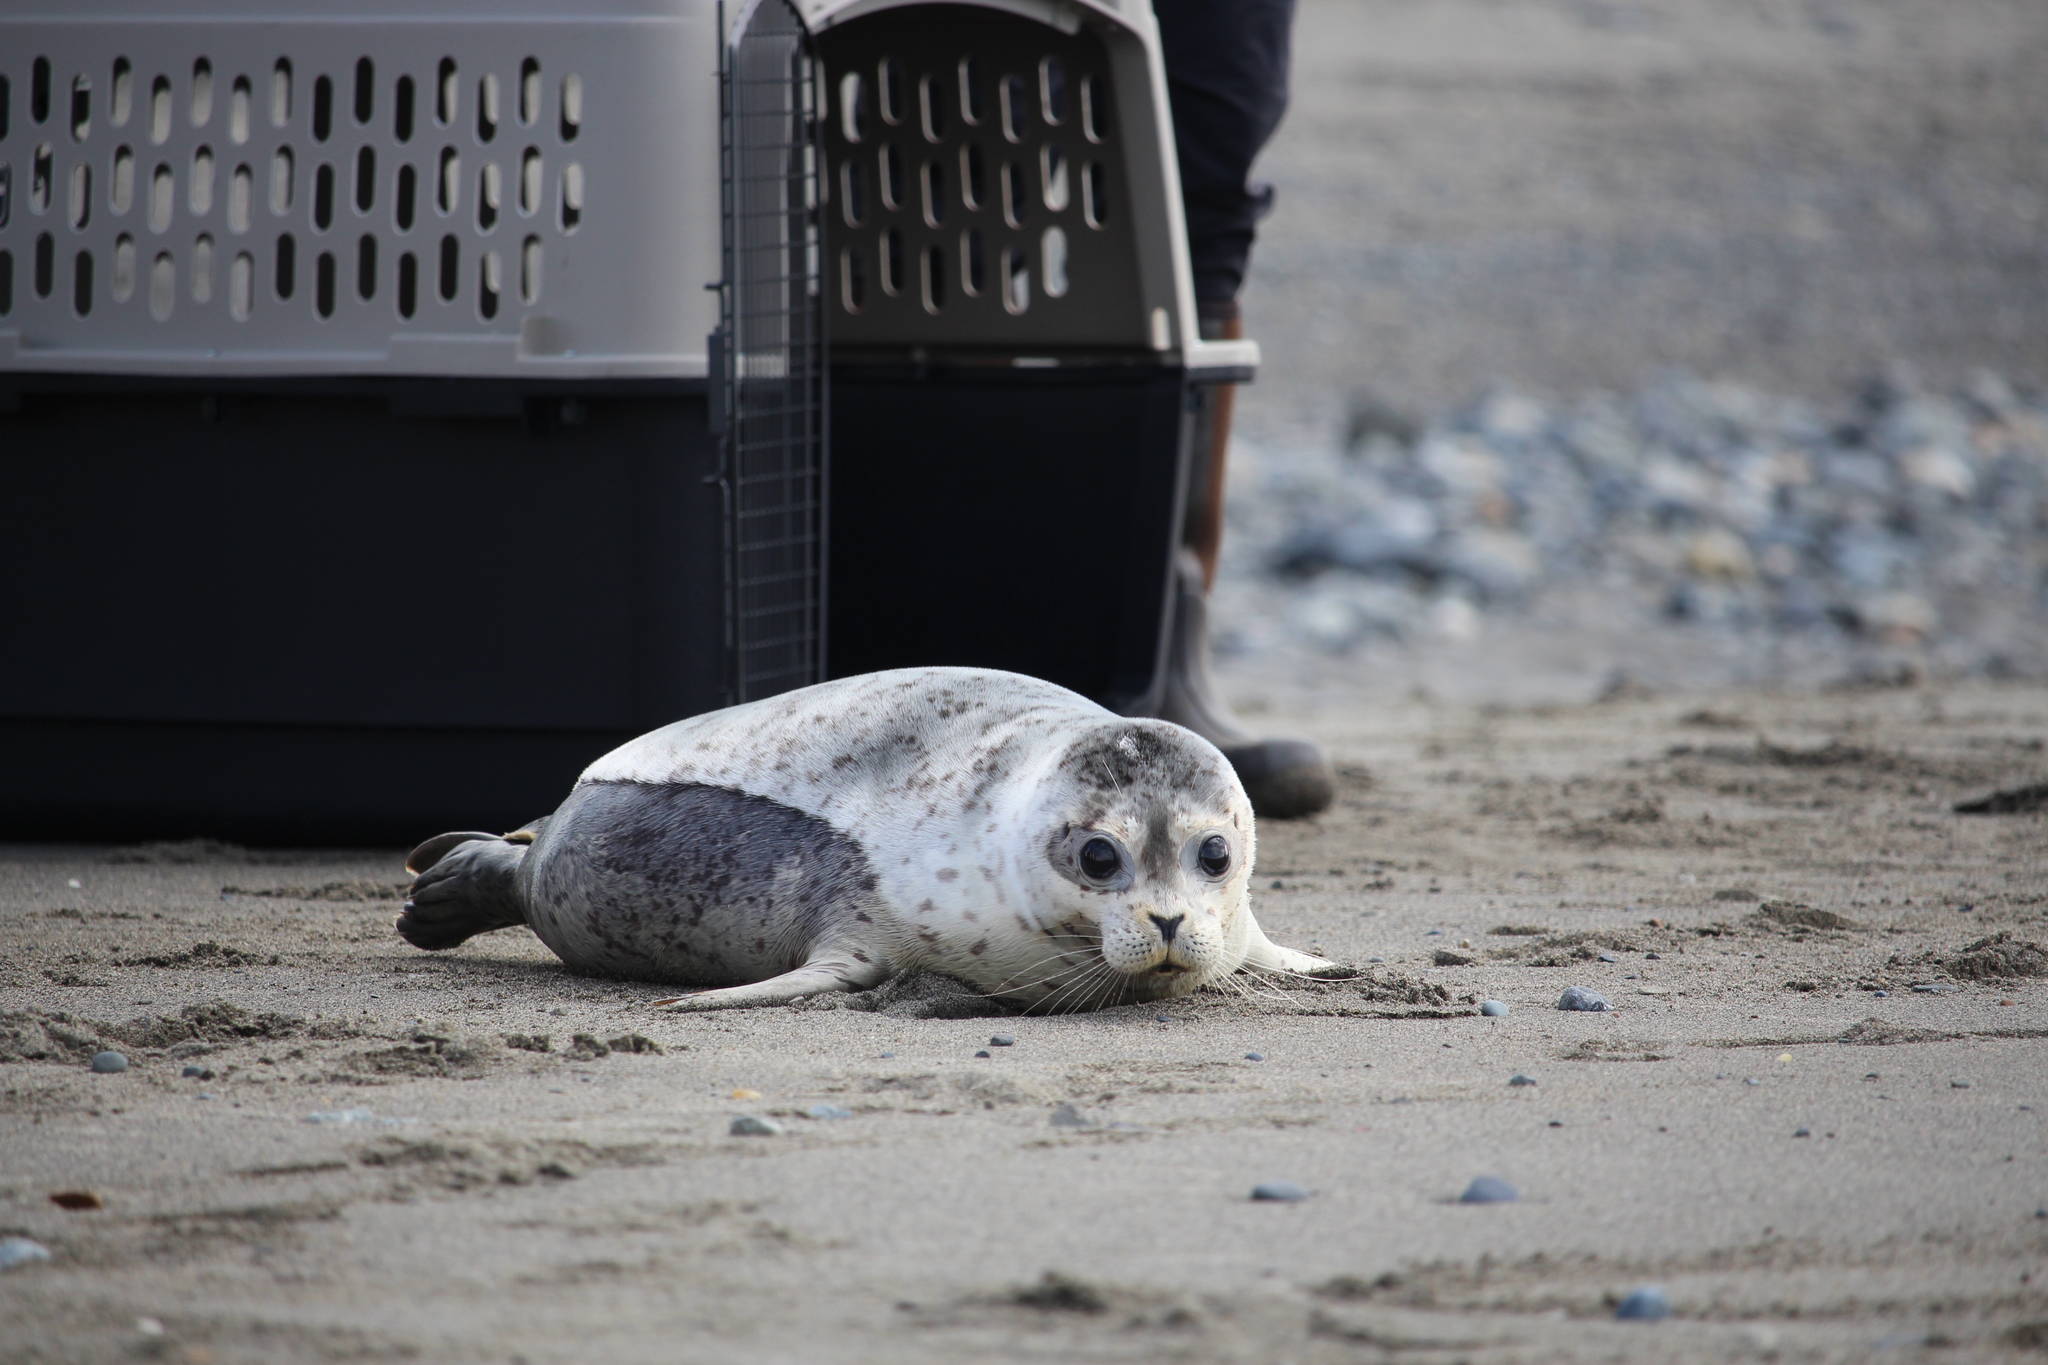 A Harbor seal makes its way into Cook Inlet after being released by staff from the Alaska SeaLife Center at the Kenai Beach on Aug. 27, 2020. (Photo by Brian Mazurek/Peninsula Clarion)